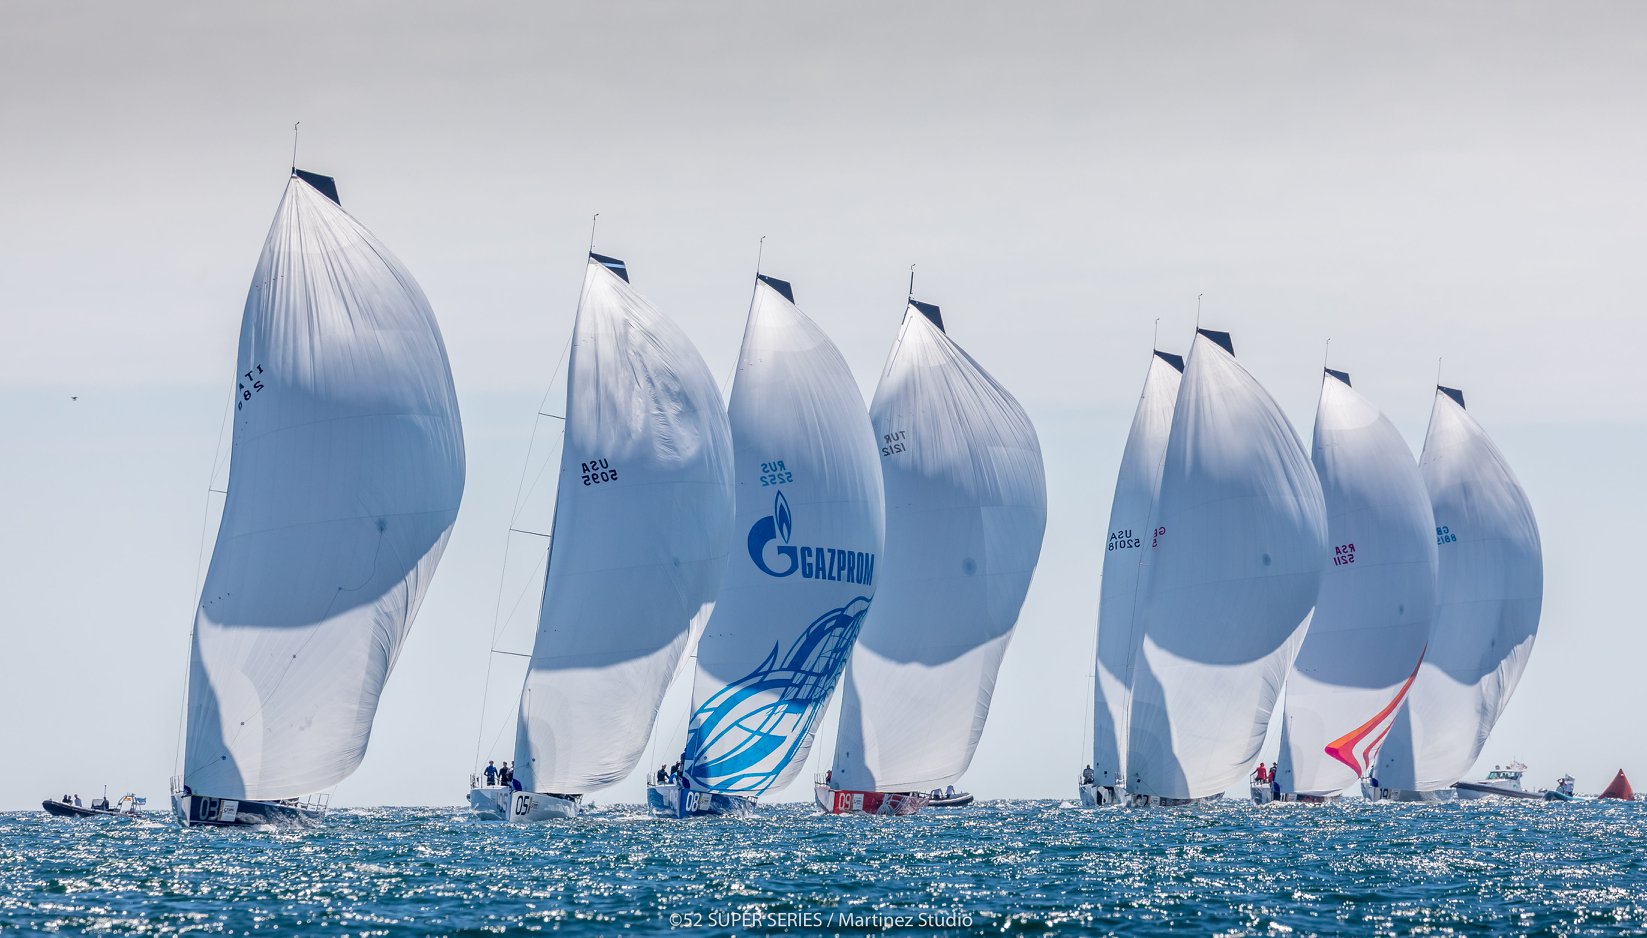 AZZURRA WINS THE SECOND RACE AT THE PUERTO SHERRY 52 SUPER SERIES - NEWS - Yacht Club Costa Smeralda